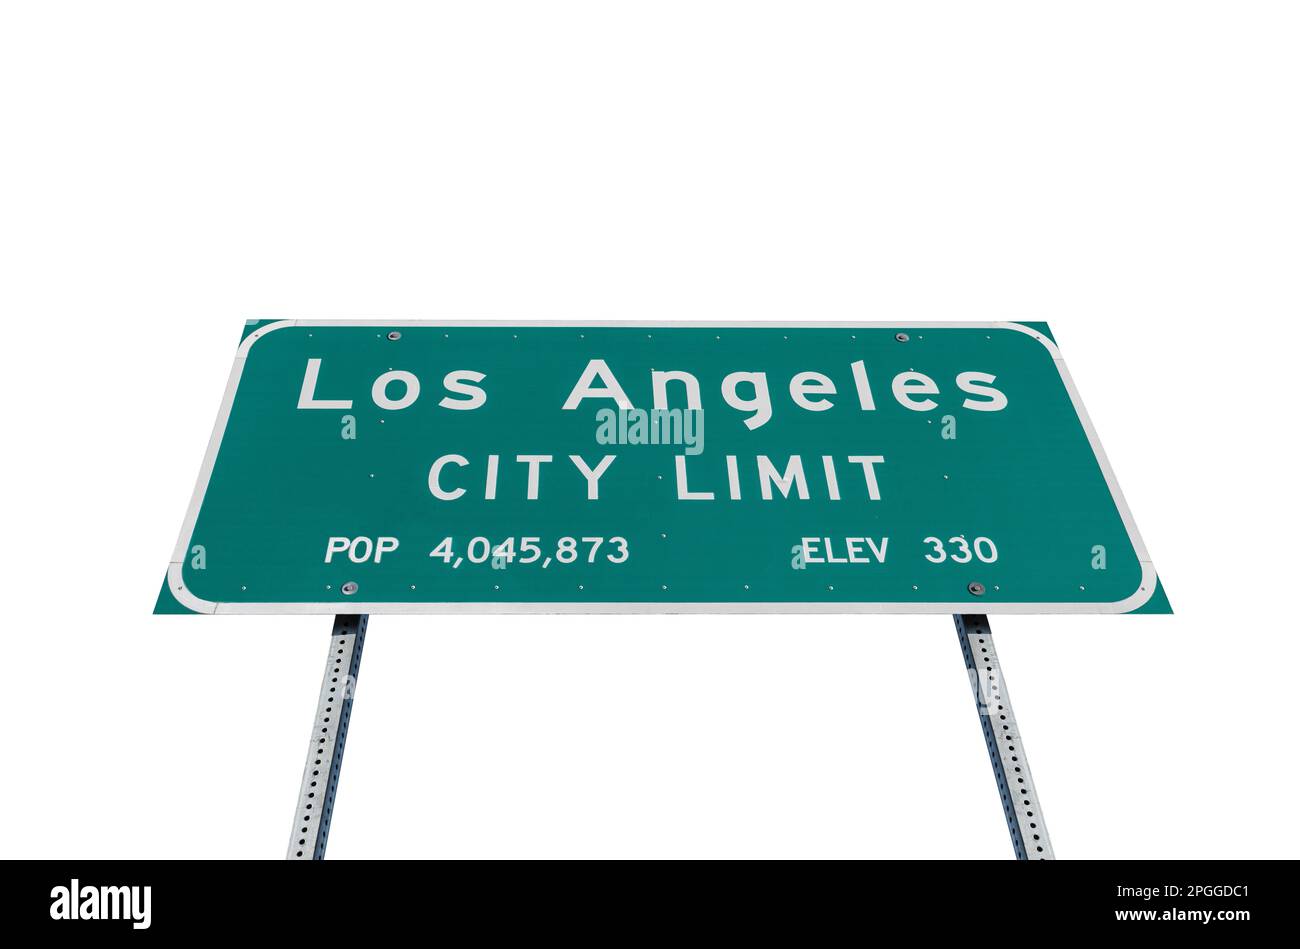 Los Angeles city limit highway sign with cut out background. Stock Photo